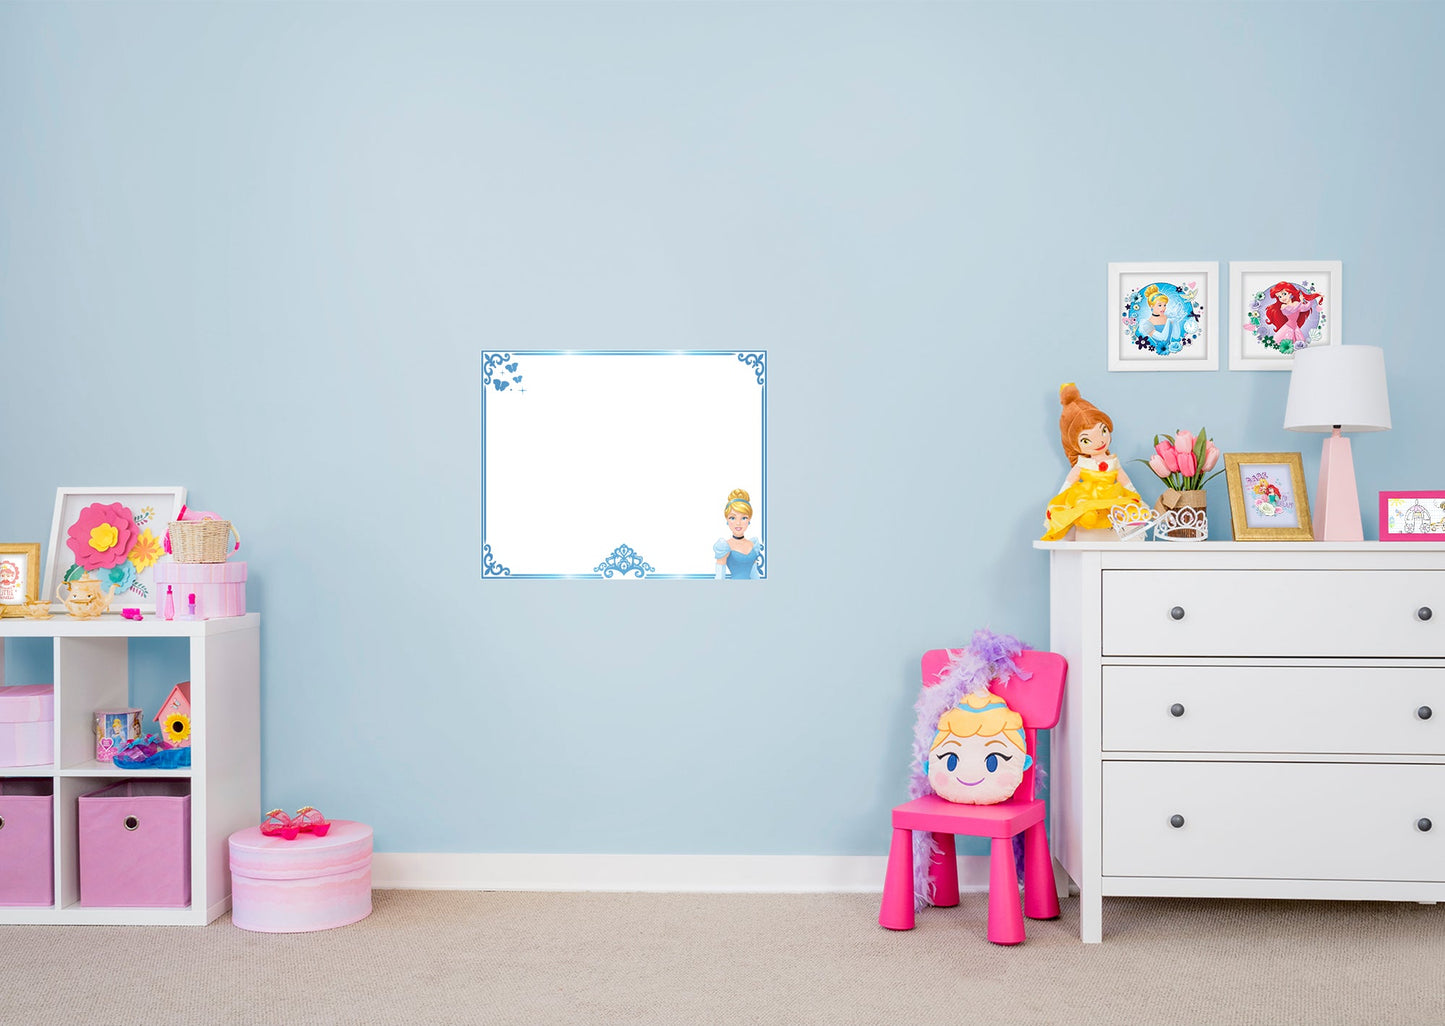 Cinderella: Cinderella Dry Erase Whiteboard        - Officially Licensed Disney Removable Wall   Adhesive Decal